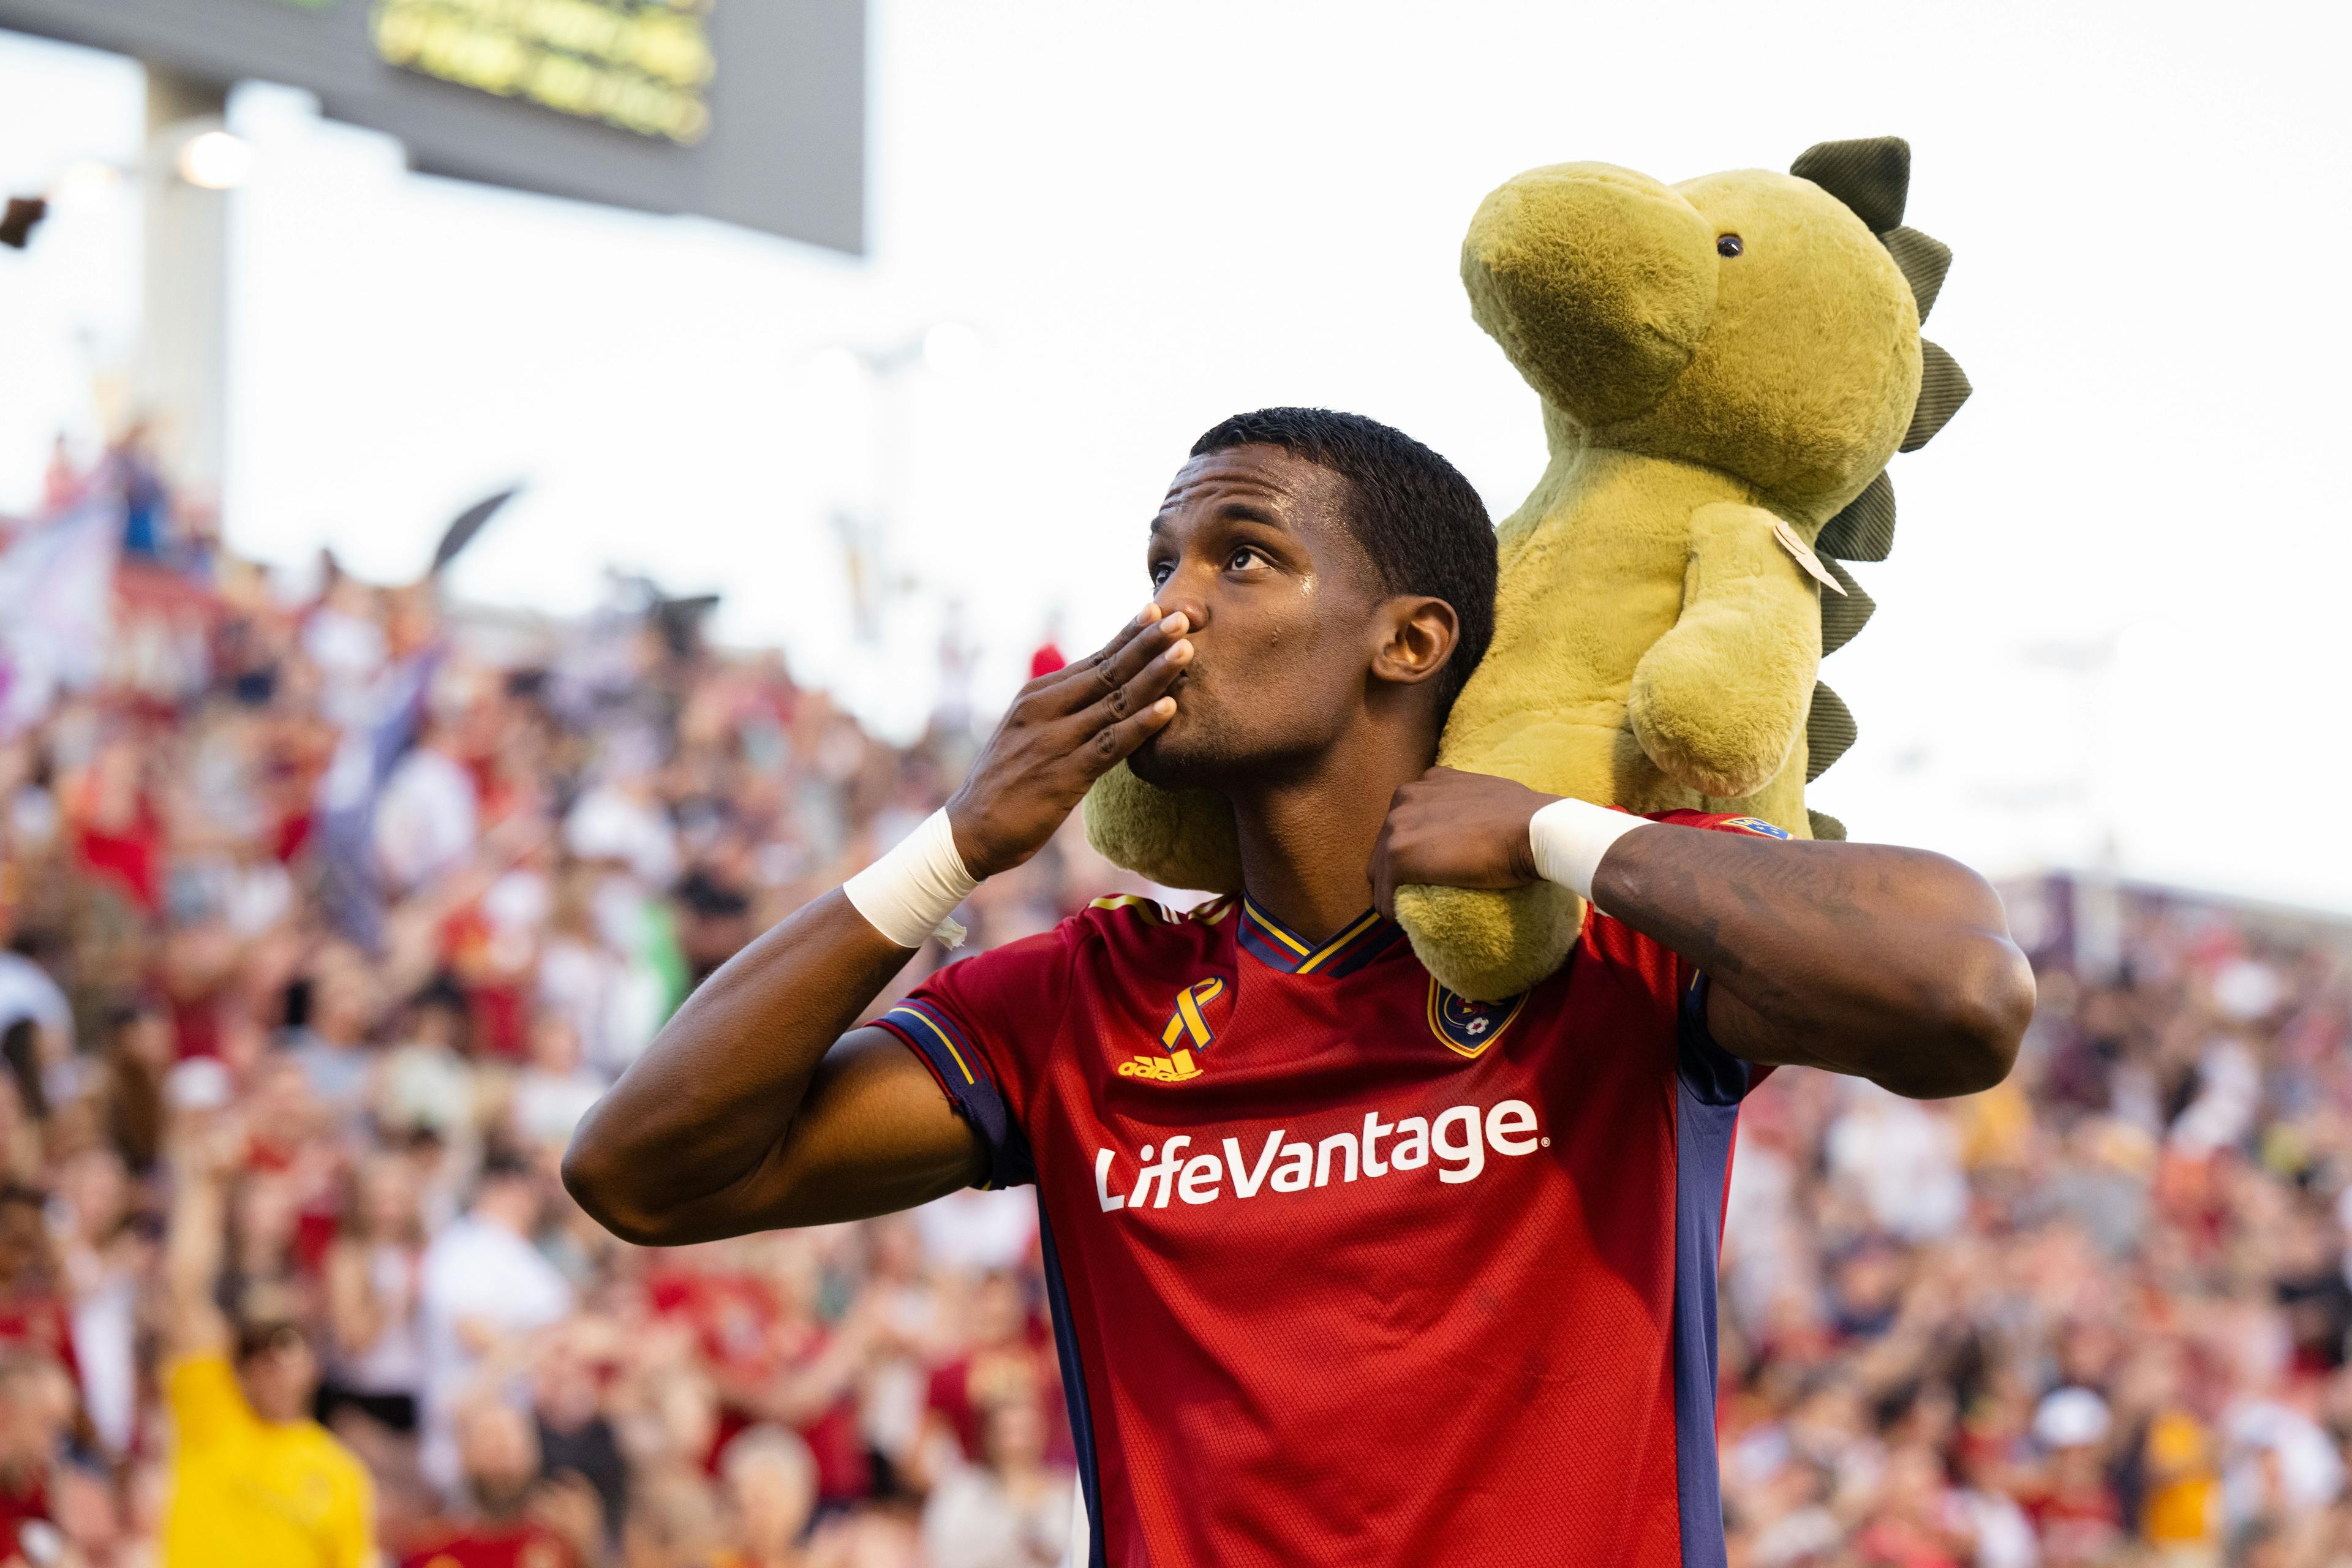 Sergio Cordova holding a stuffed dinosaur on his shoulders and blowing a kiss to the crowd